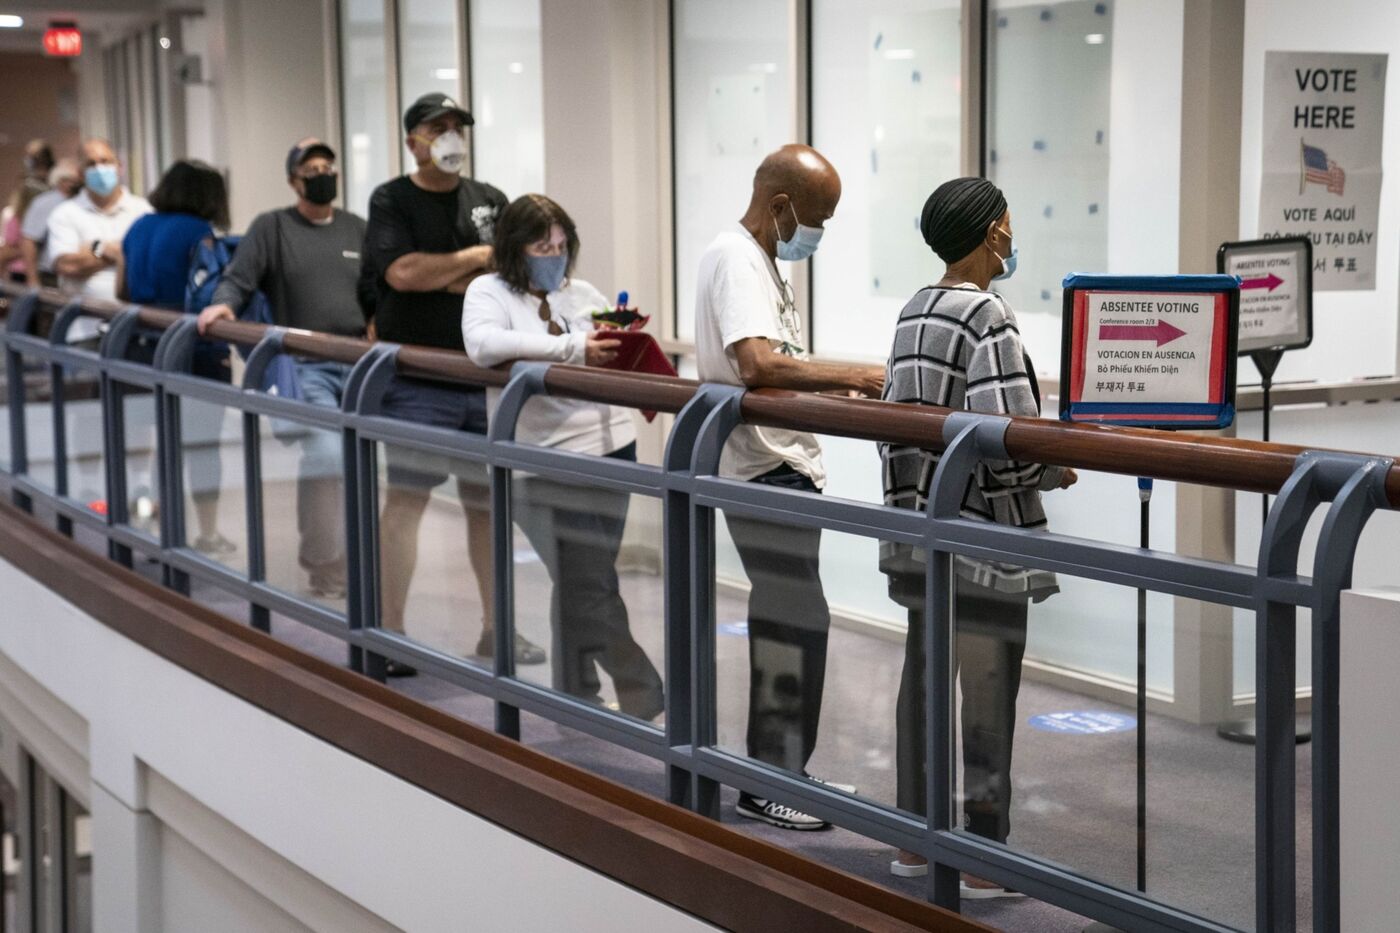 Voters stand in line to cast ballots at an early voting polling location for the 2020 presidential election in Fairfax, Virginia, on Sept. 18, 2020. Virginia became the first state to pass its own version of the federal Voting Rights Act this year.